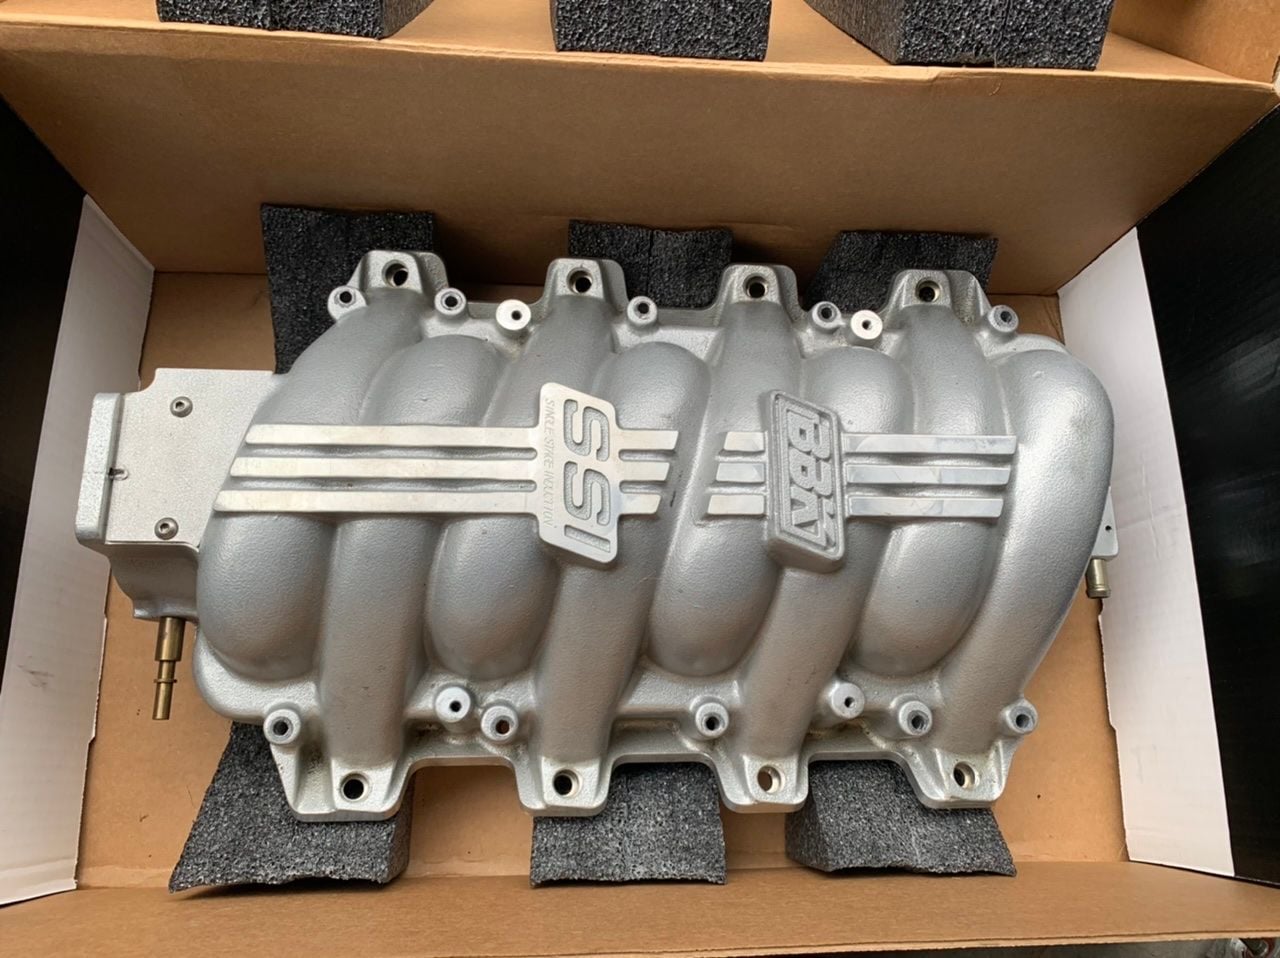 Engine - Intake/Fuel - BBK intake Manifold aluminum LS1 LS6 LS2 cathedral port heads - Used - 1997 to 2008 Chevrolet Corvette - Gainesville, VA 20155, United States